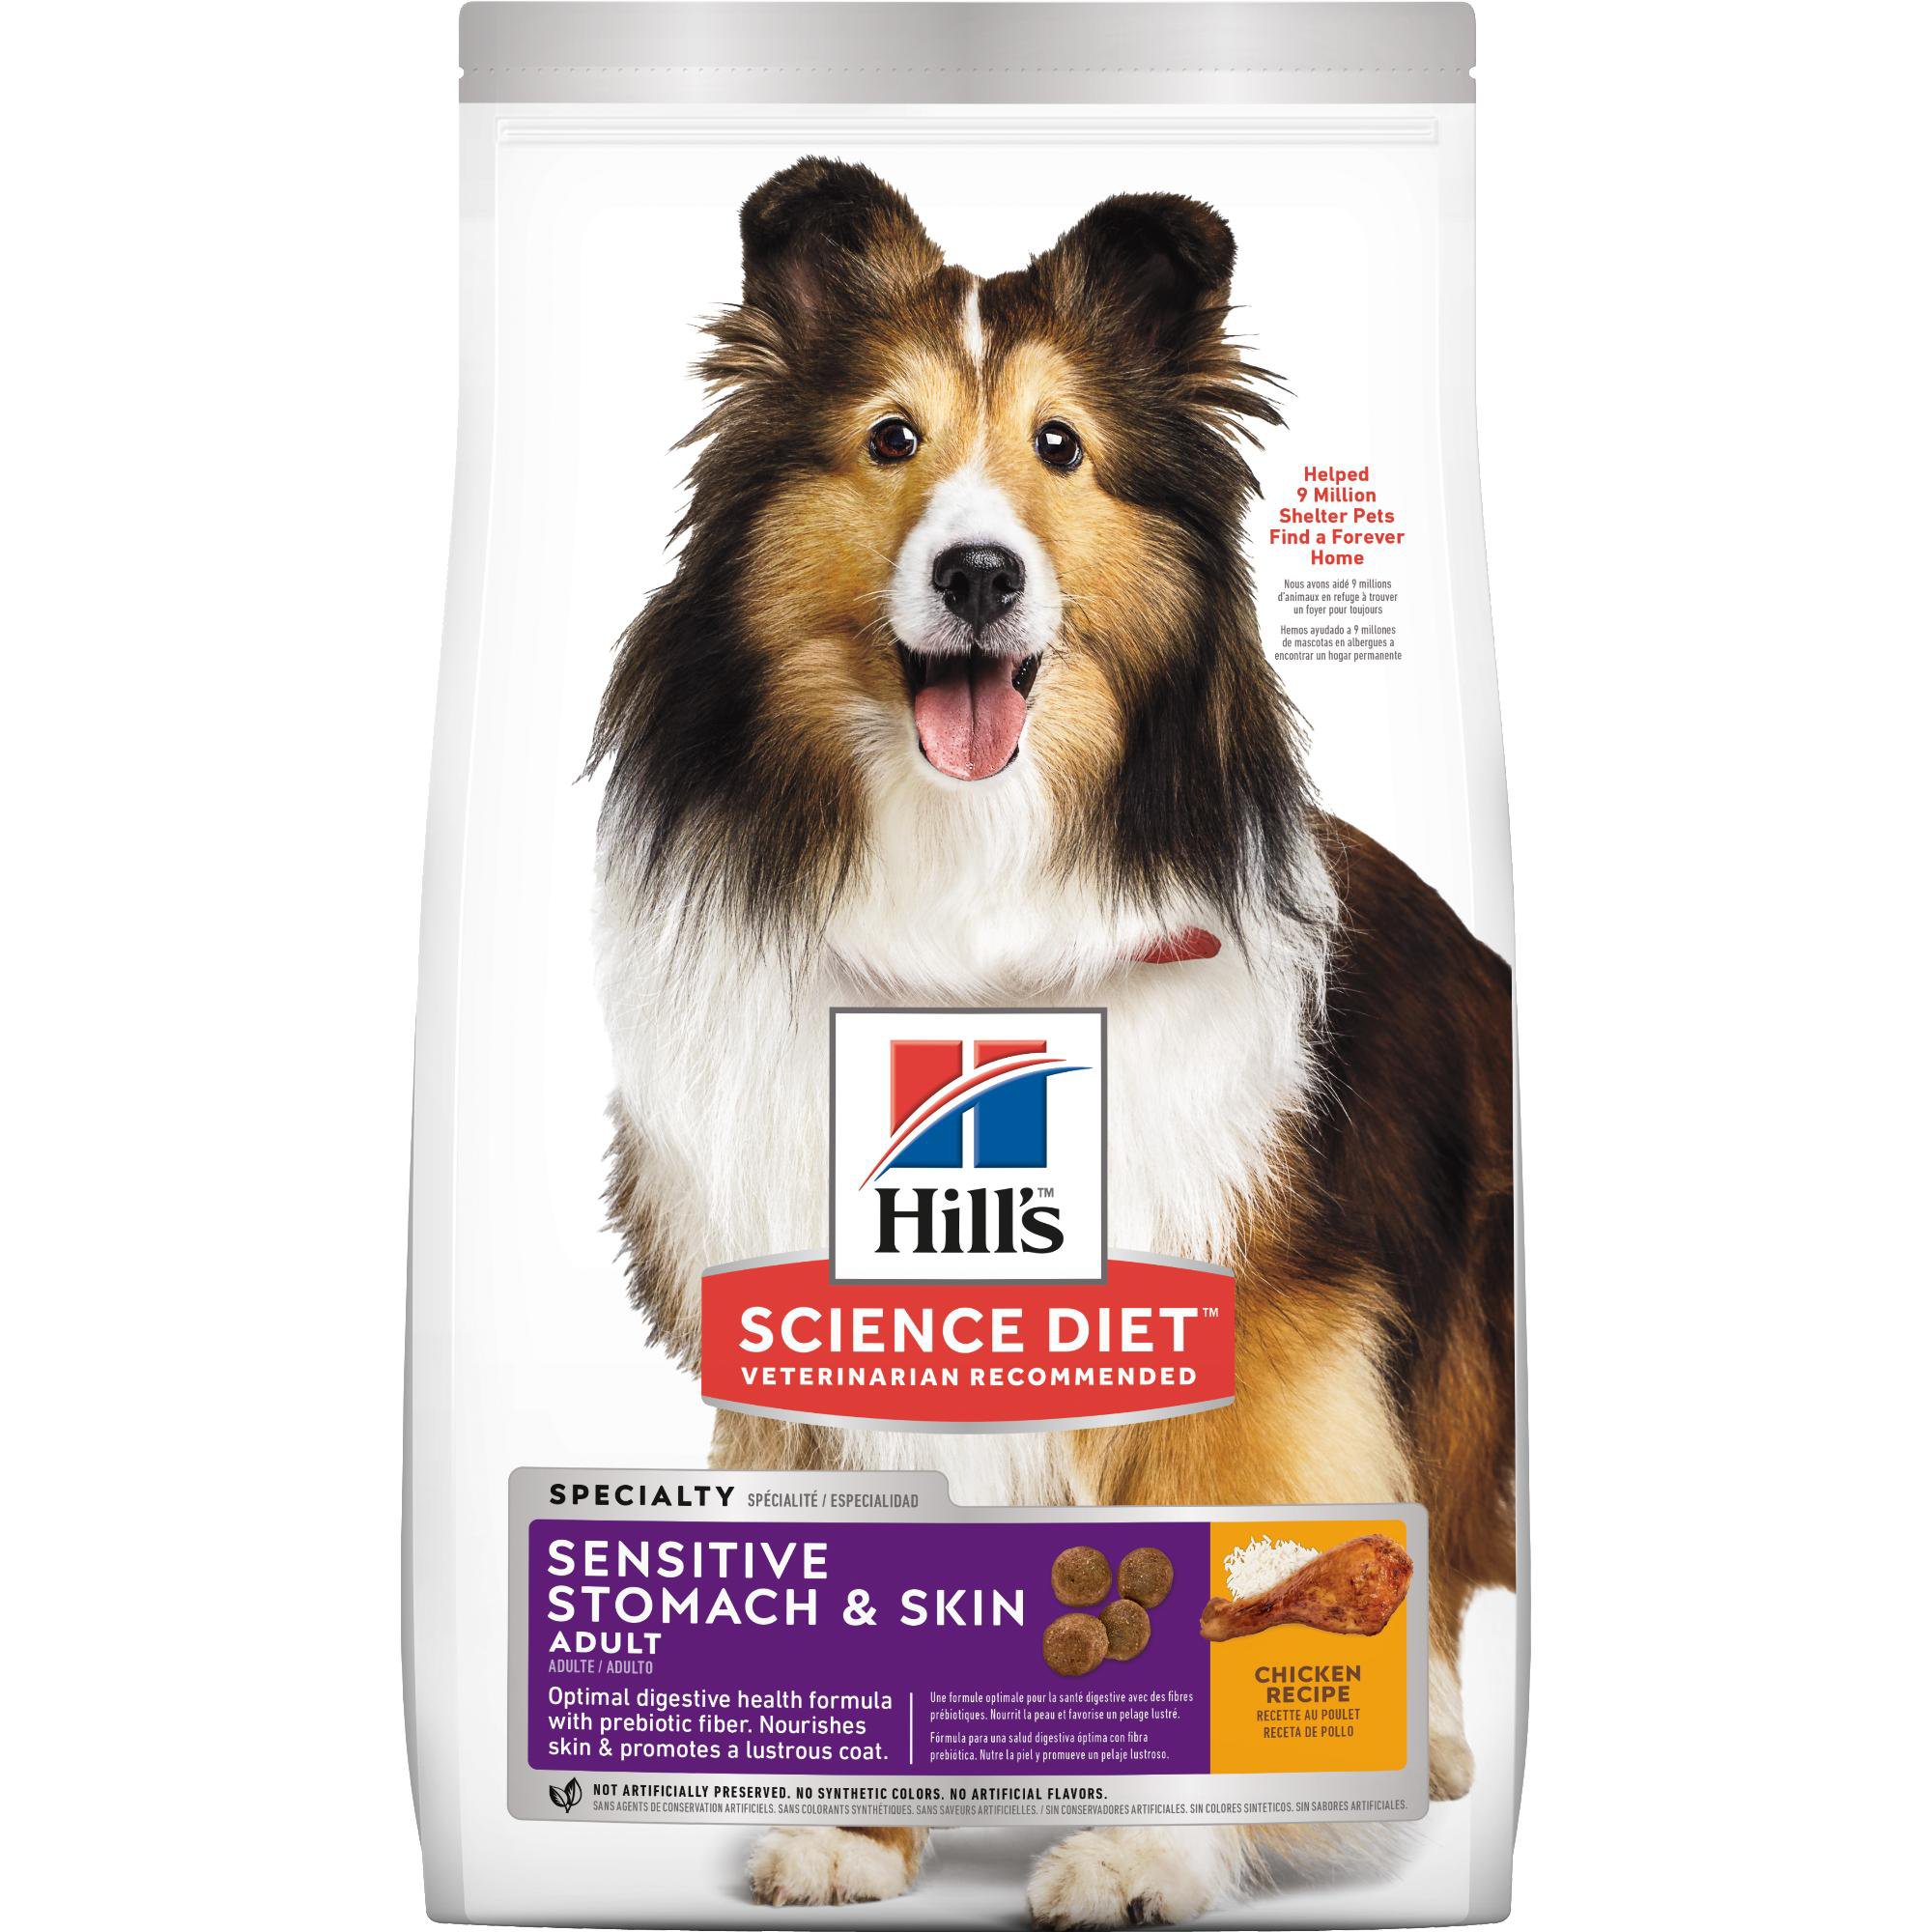 Hill's Science Diet Sensitive Stomach & Skin Adult Dry Dog Food, 30 lbs